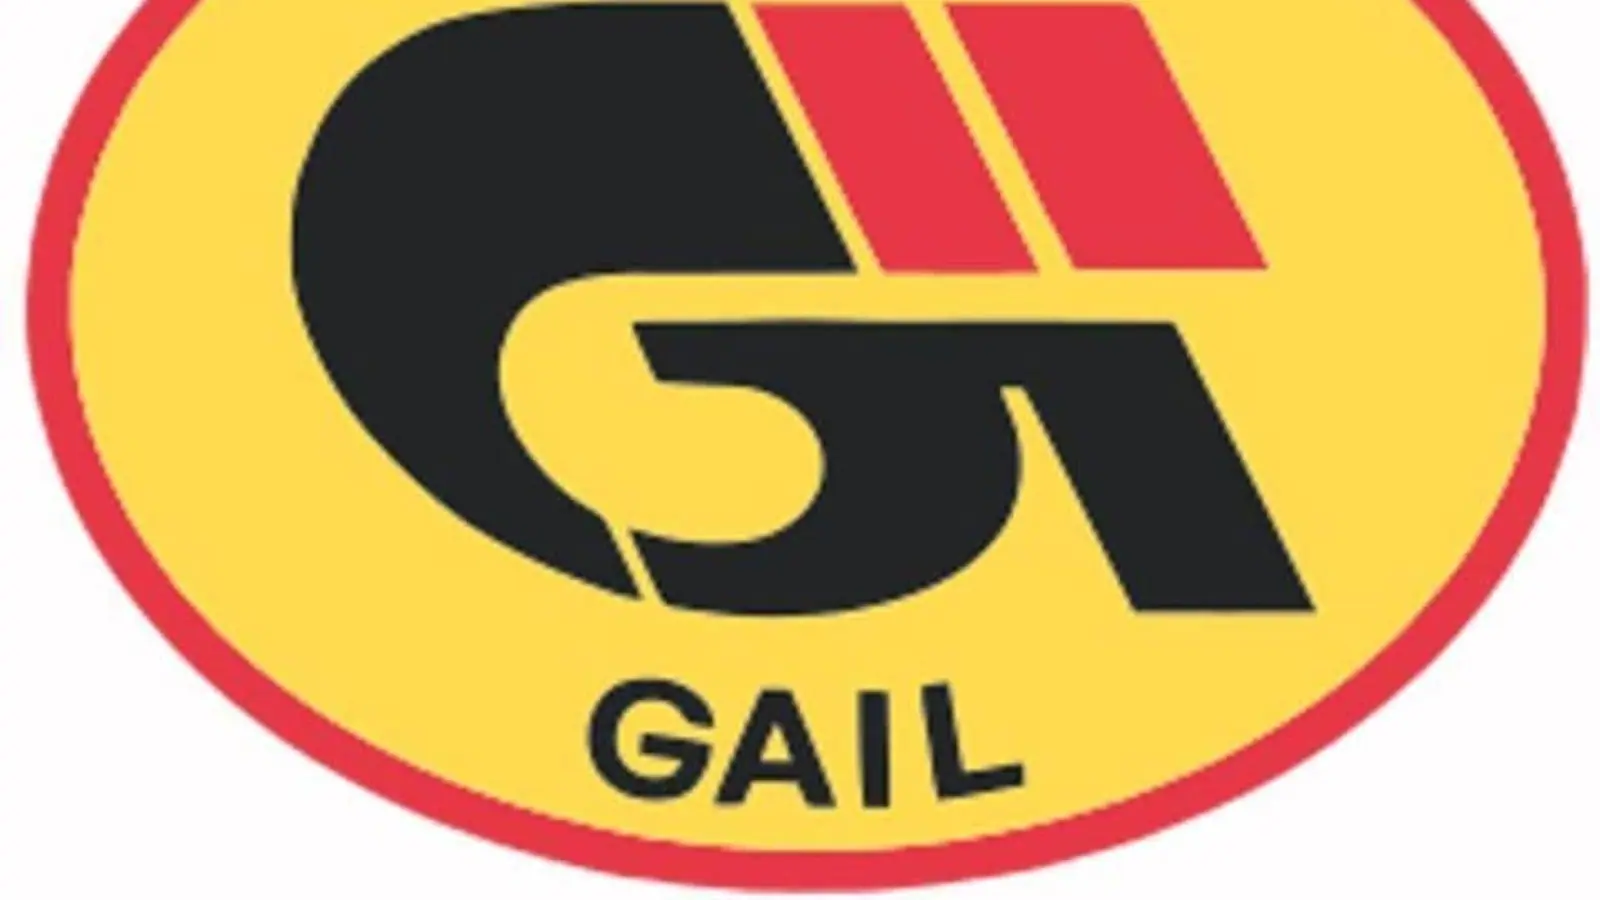 GAIL Limited Recruitment 2022: Apply for 282 Non Executive posts, details here